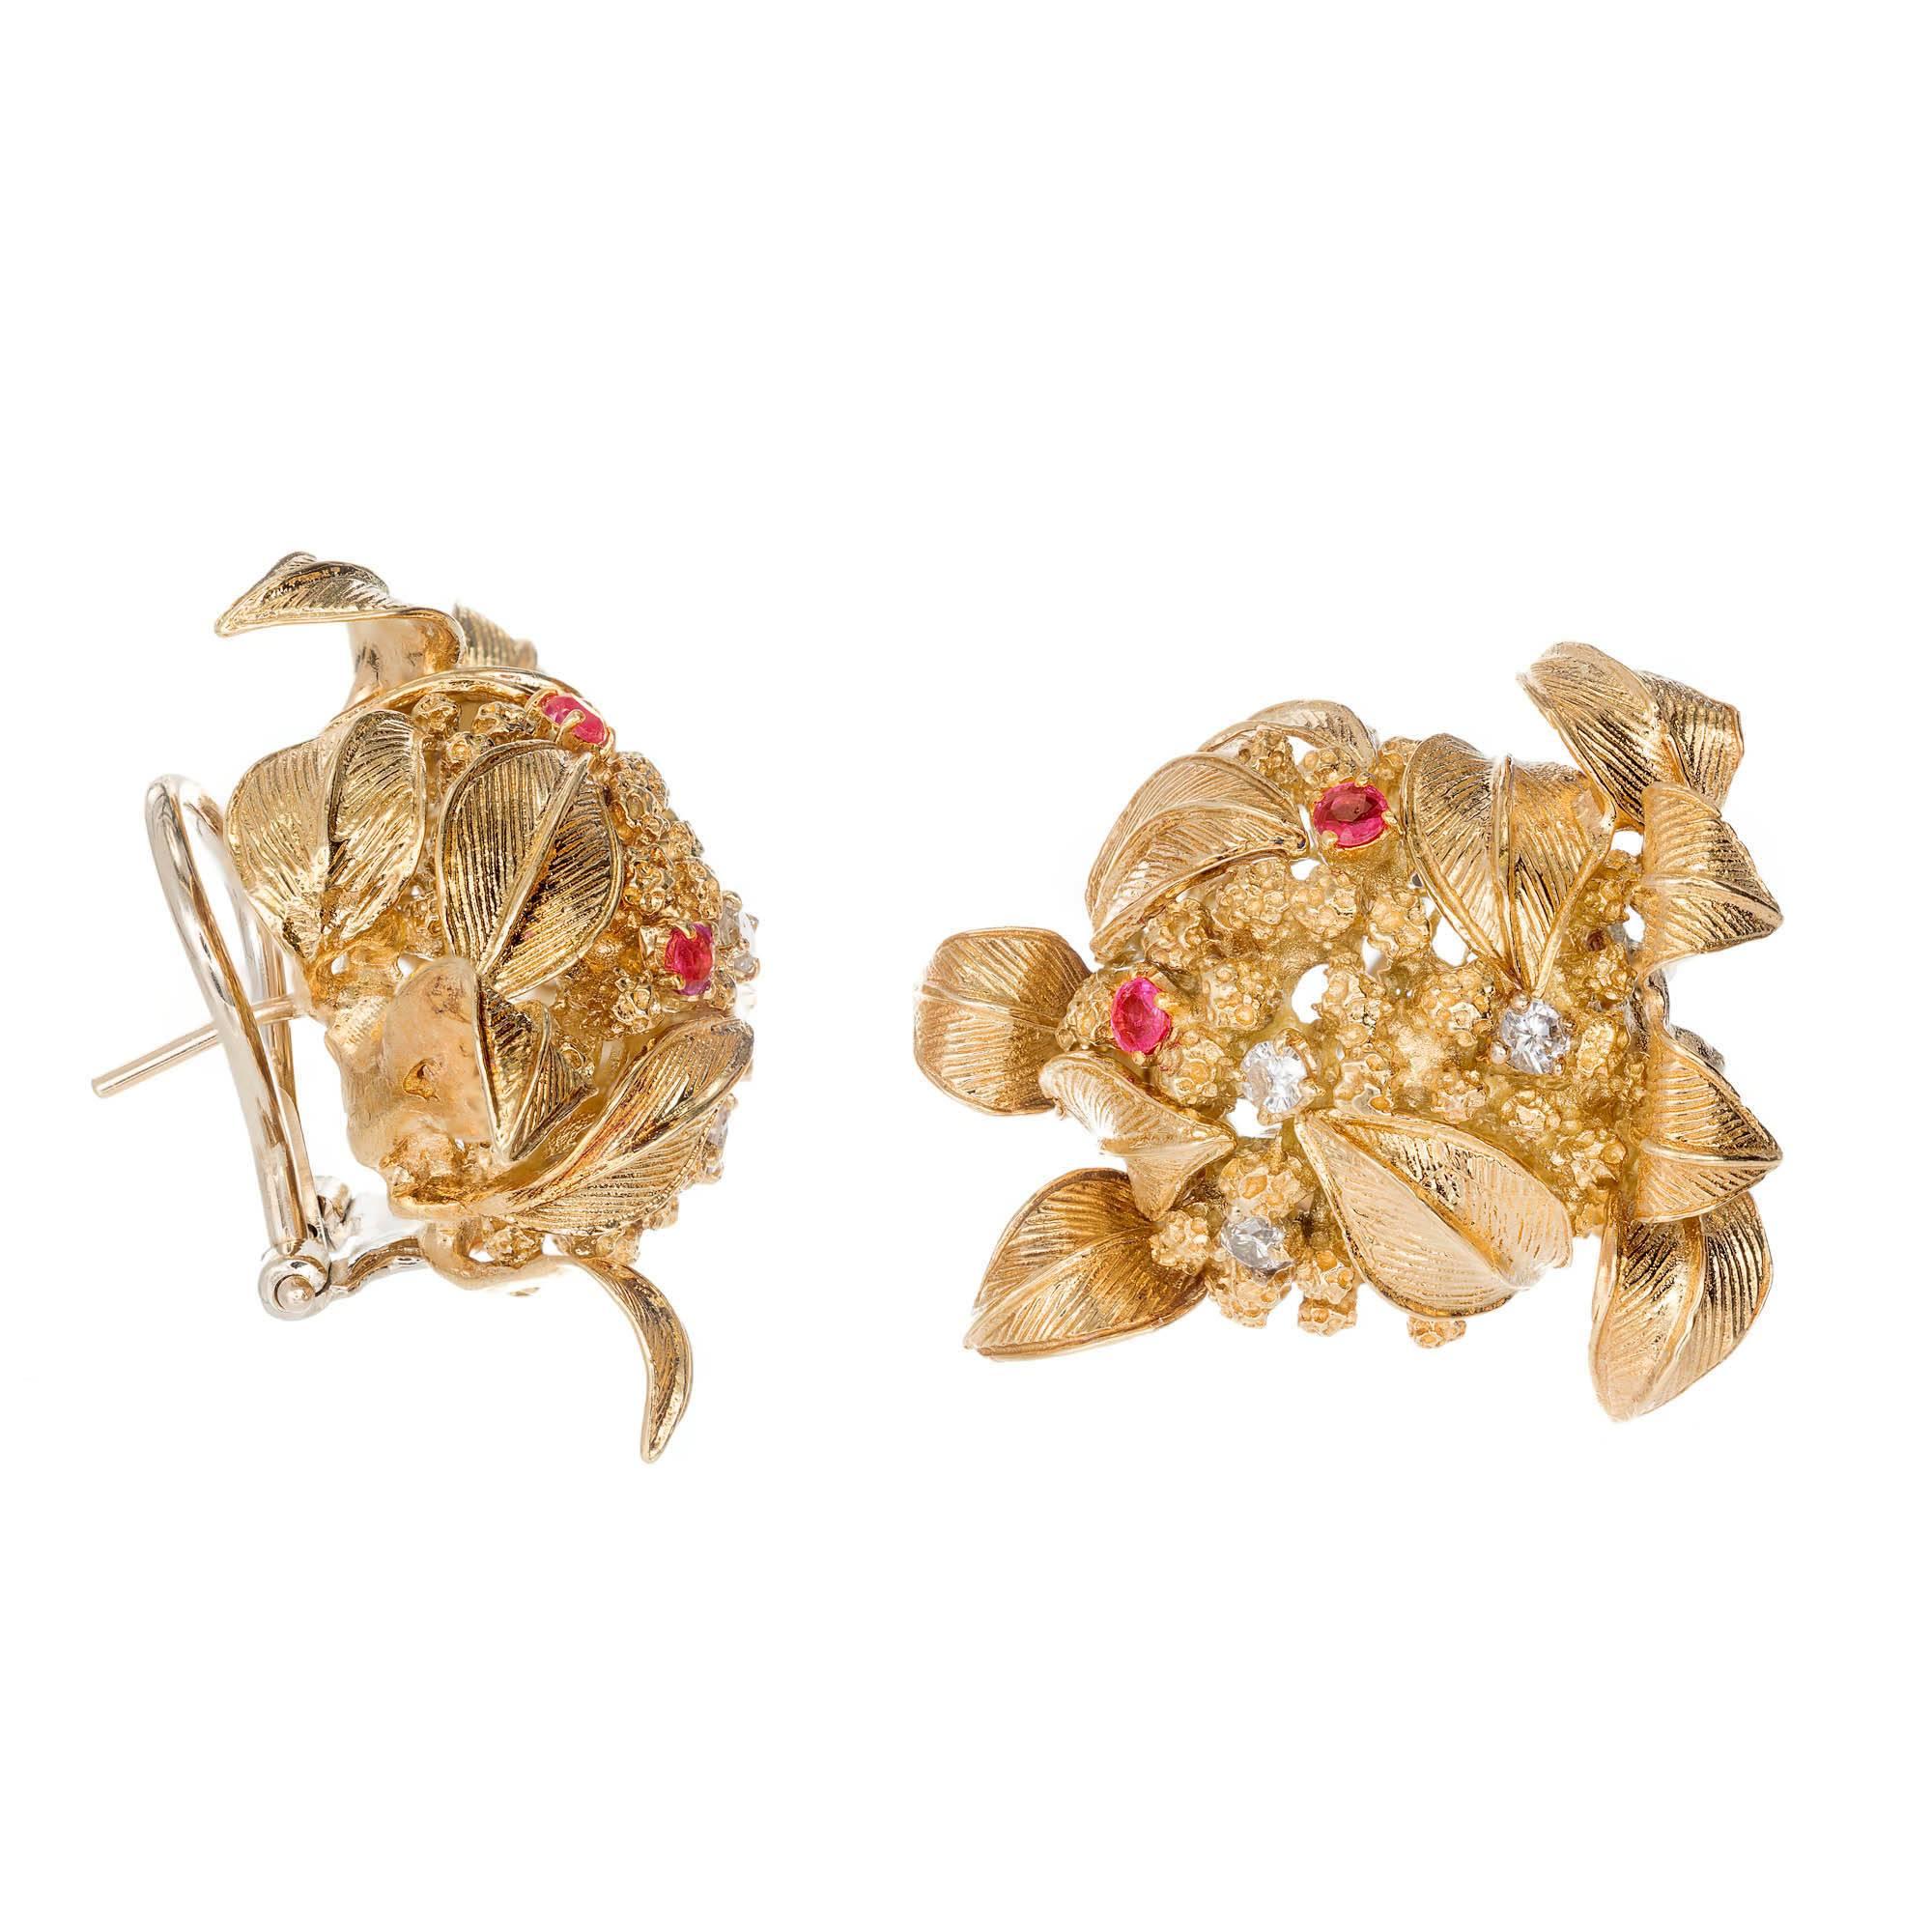 Three dimensional handmade 18k solid gold clip post earrings. All hand textured and detailed. Set with full cut diamonds and bright red Rubies.

4 natural red untreated Rubies 2mm, approx. total weight .20cts.
6 round diamonds approx. total weight